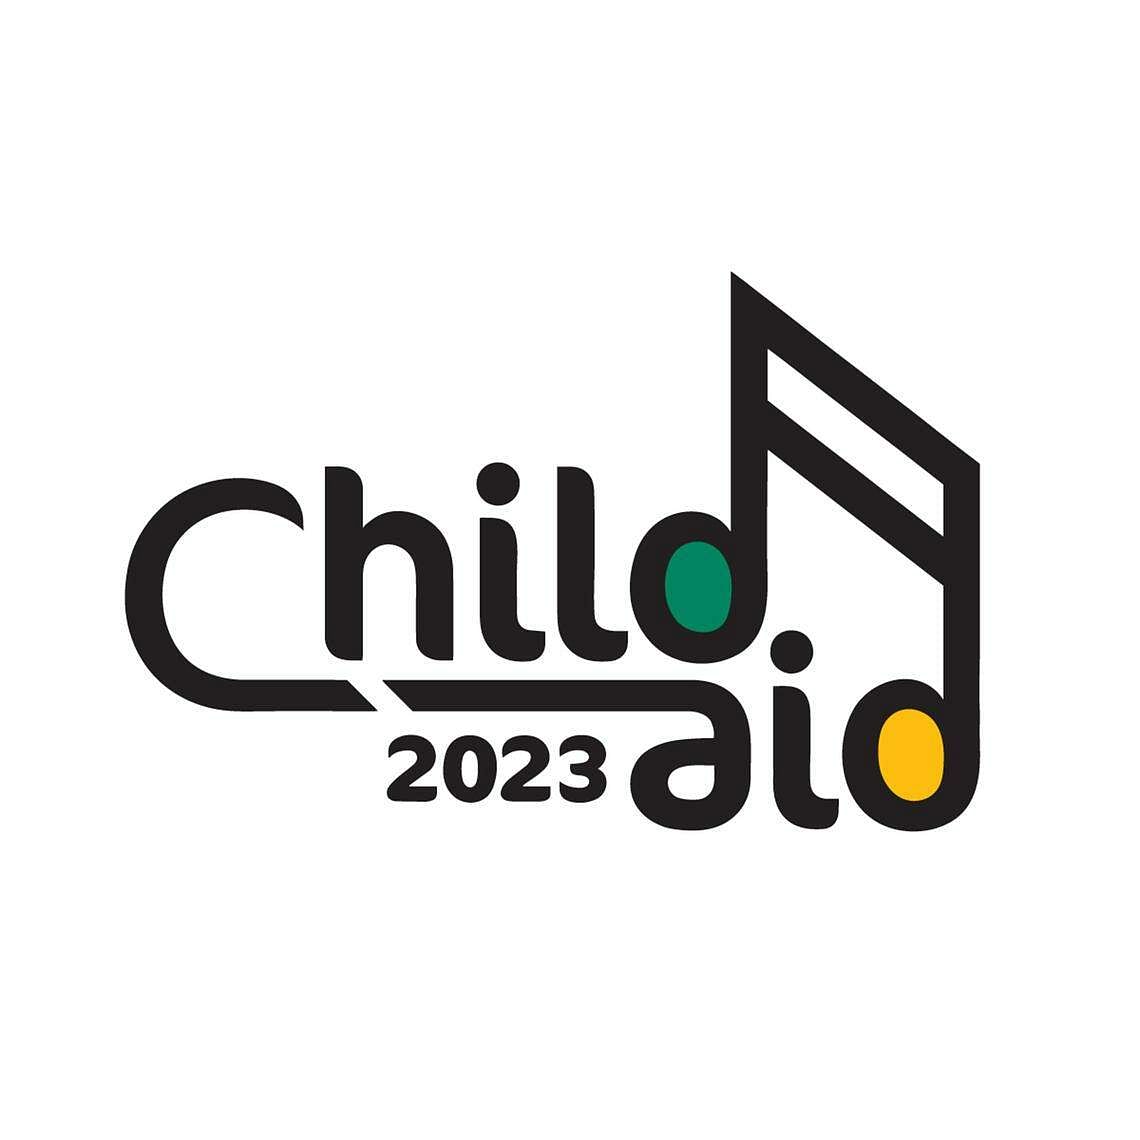 solve interactive whodunnit amid music, dance and drama at childaid 2023